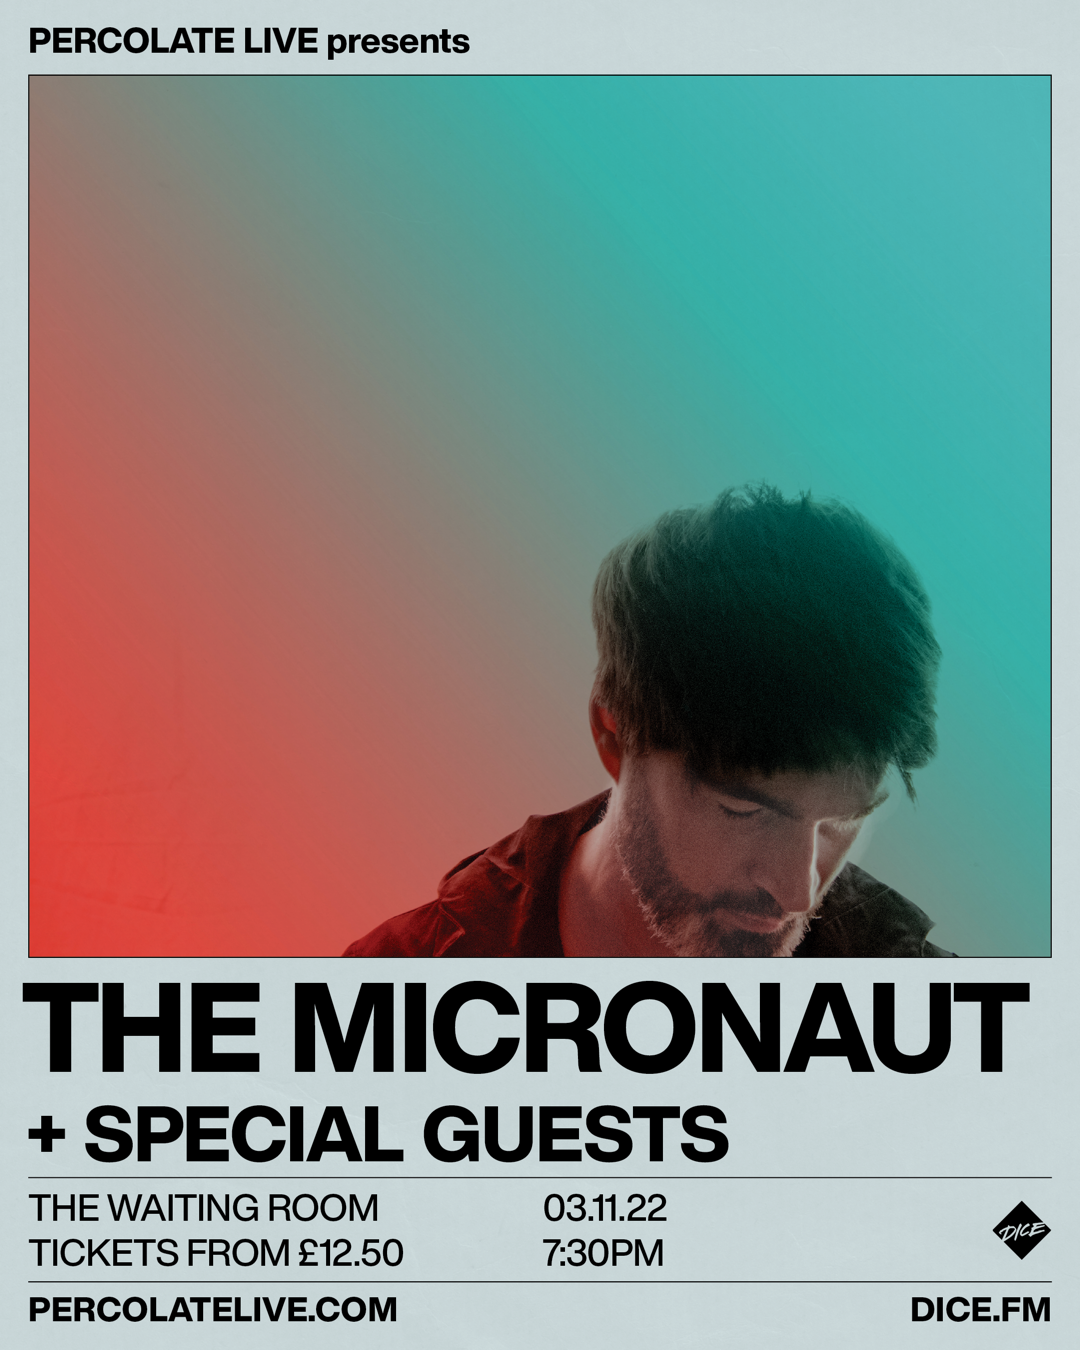 Percolate Live: The Micronaut - Flyer back